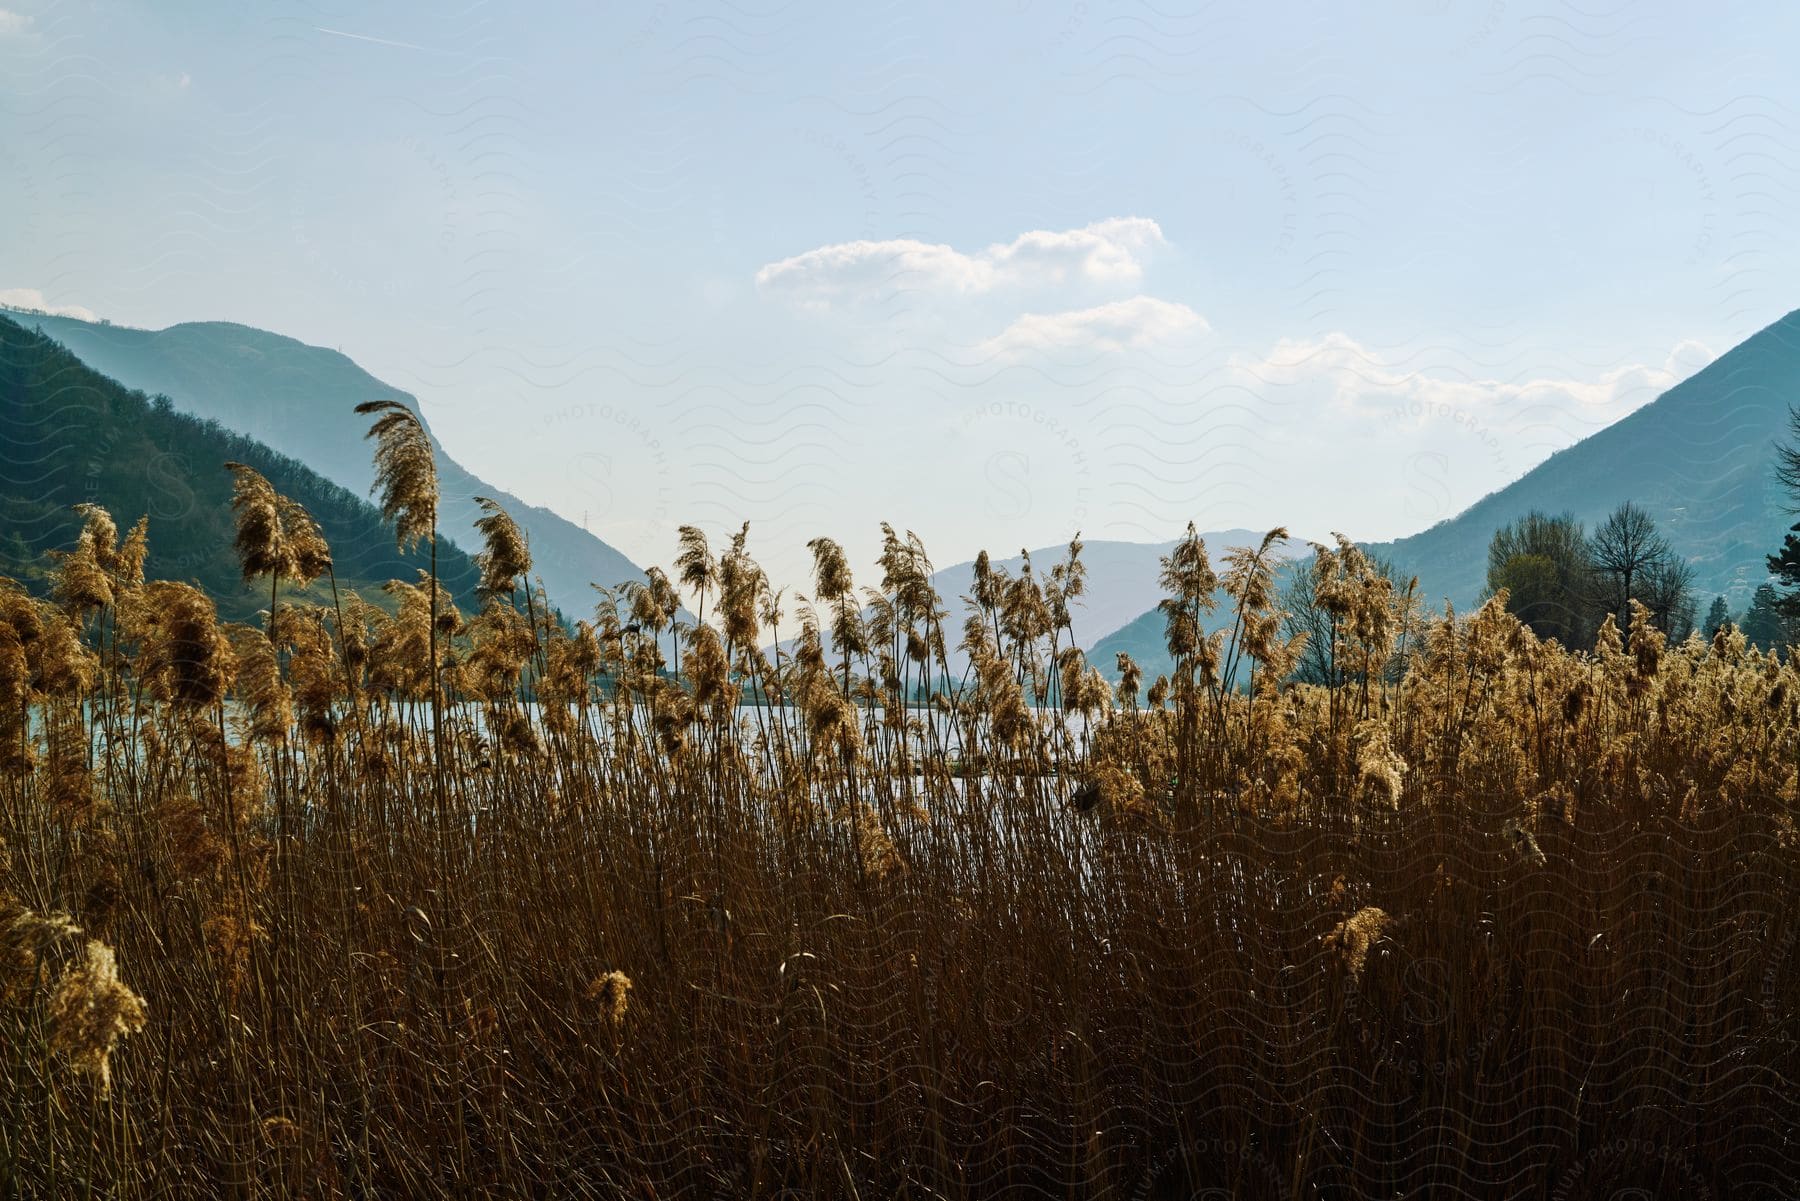 Tall grass sways in a field with mountains in the distance and a calm lake reflecting a few clouds.